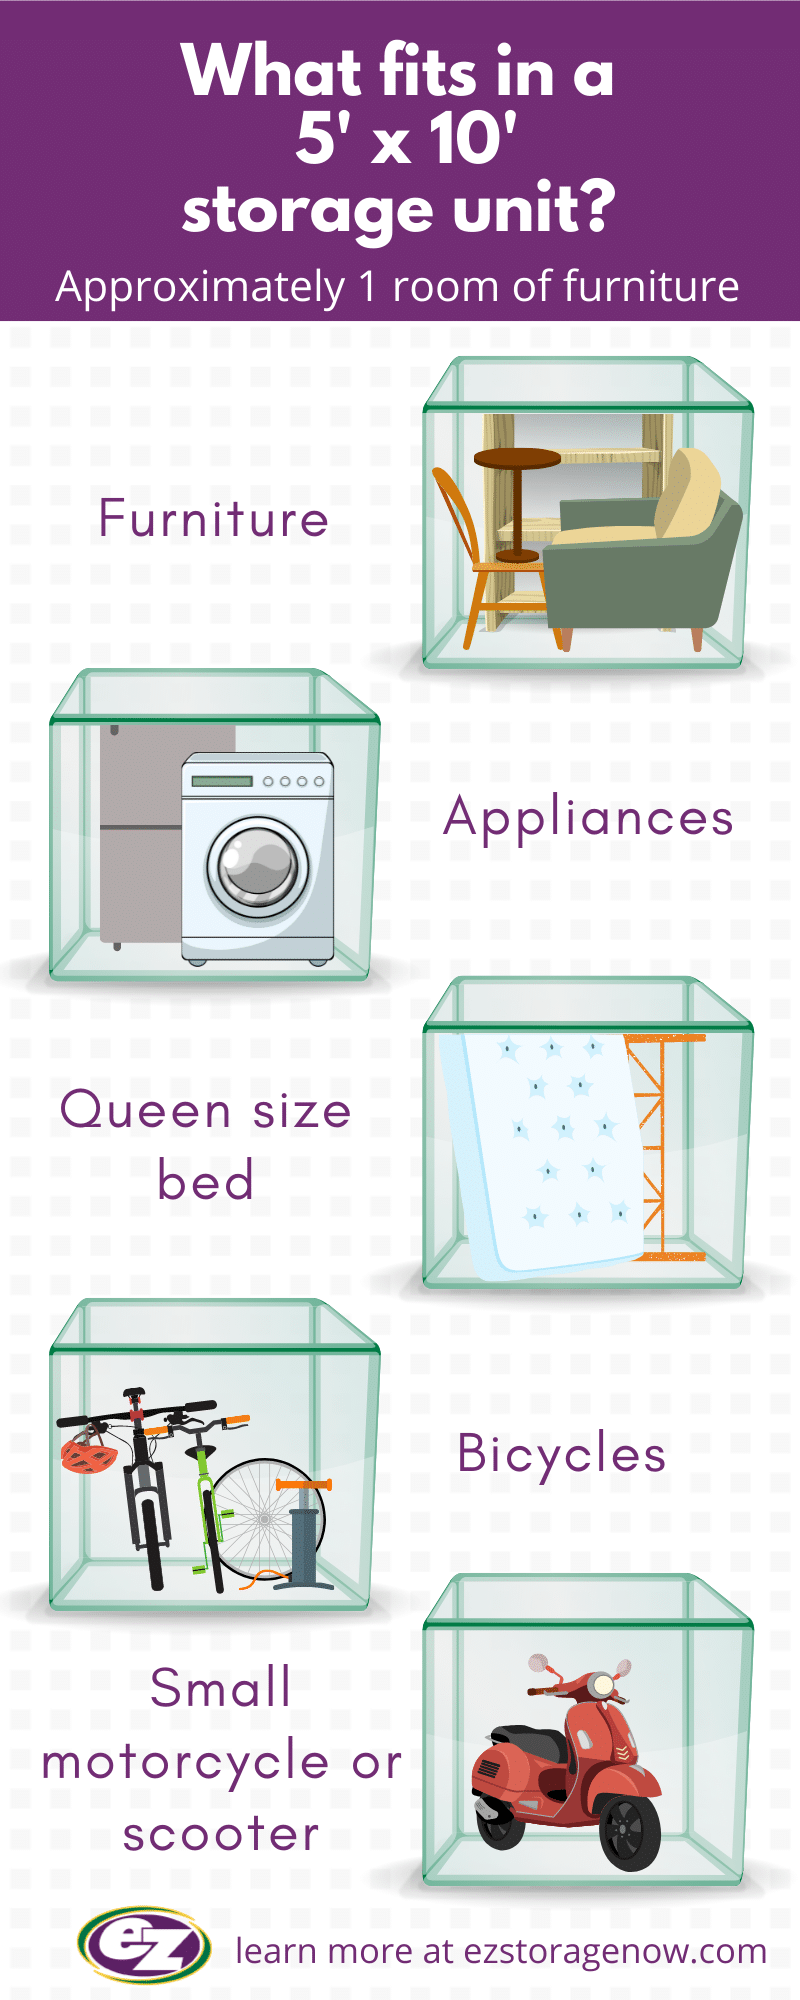 Infographic of what fits in a 5 x 10 storage unit.